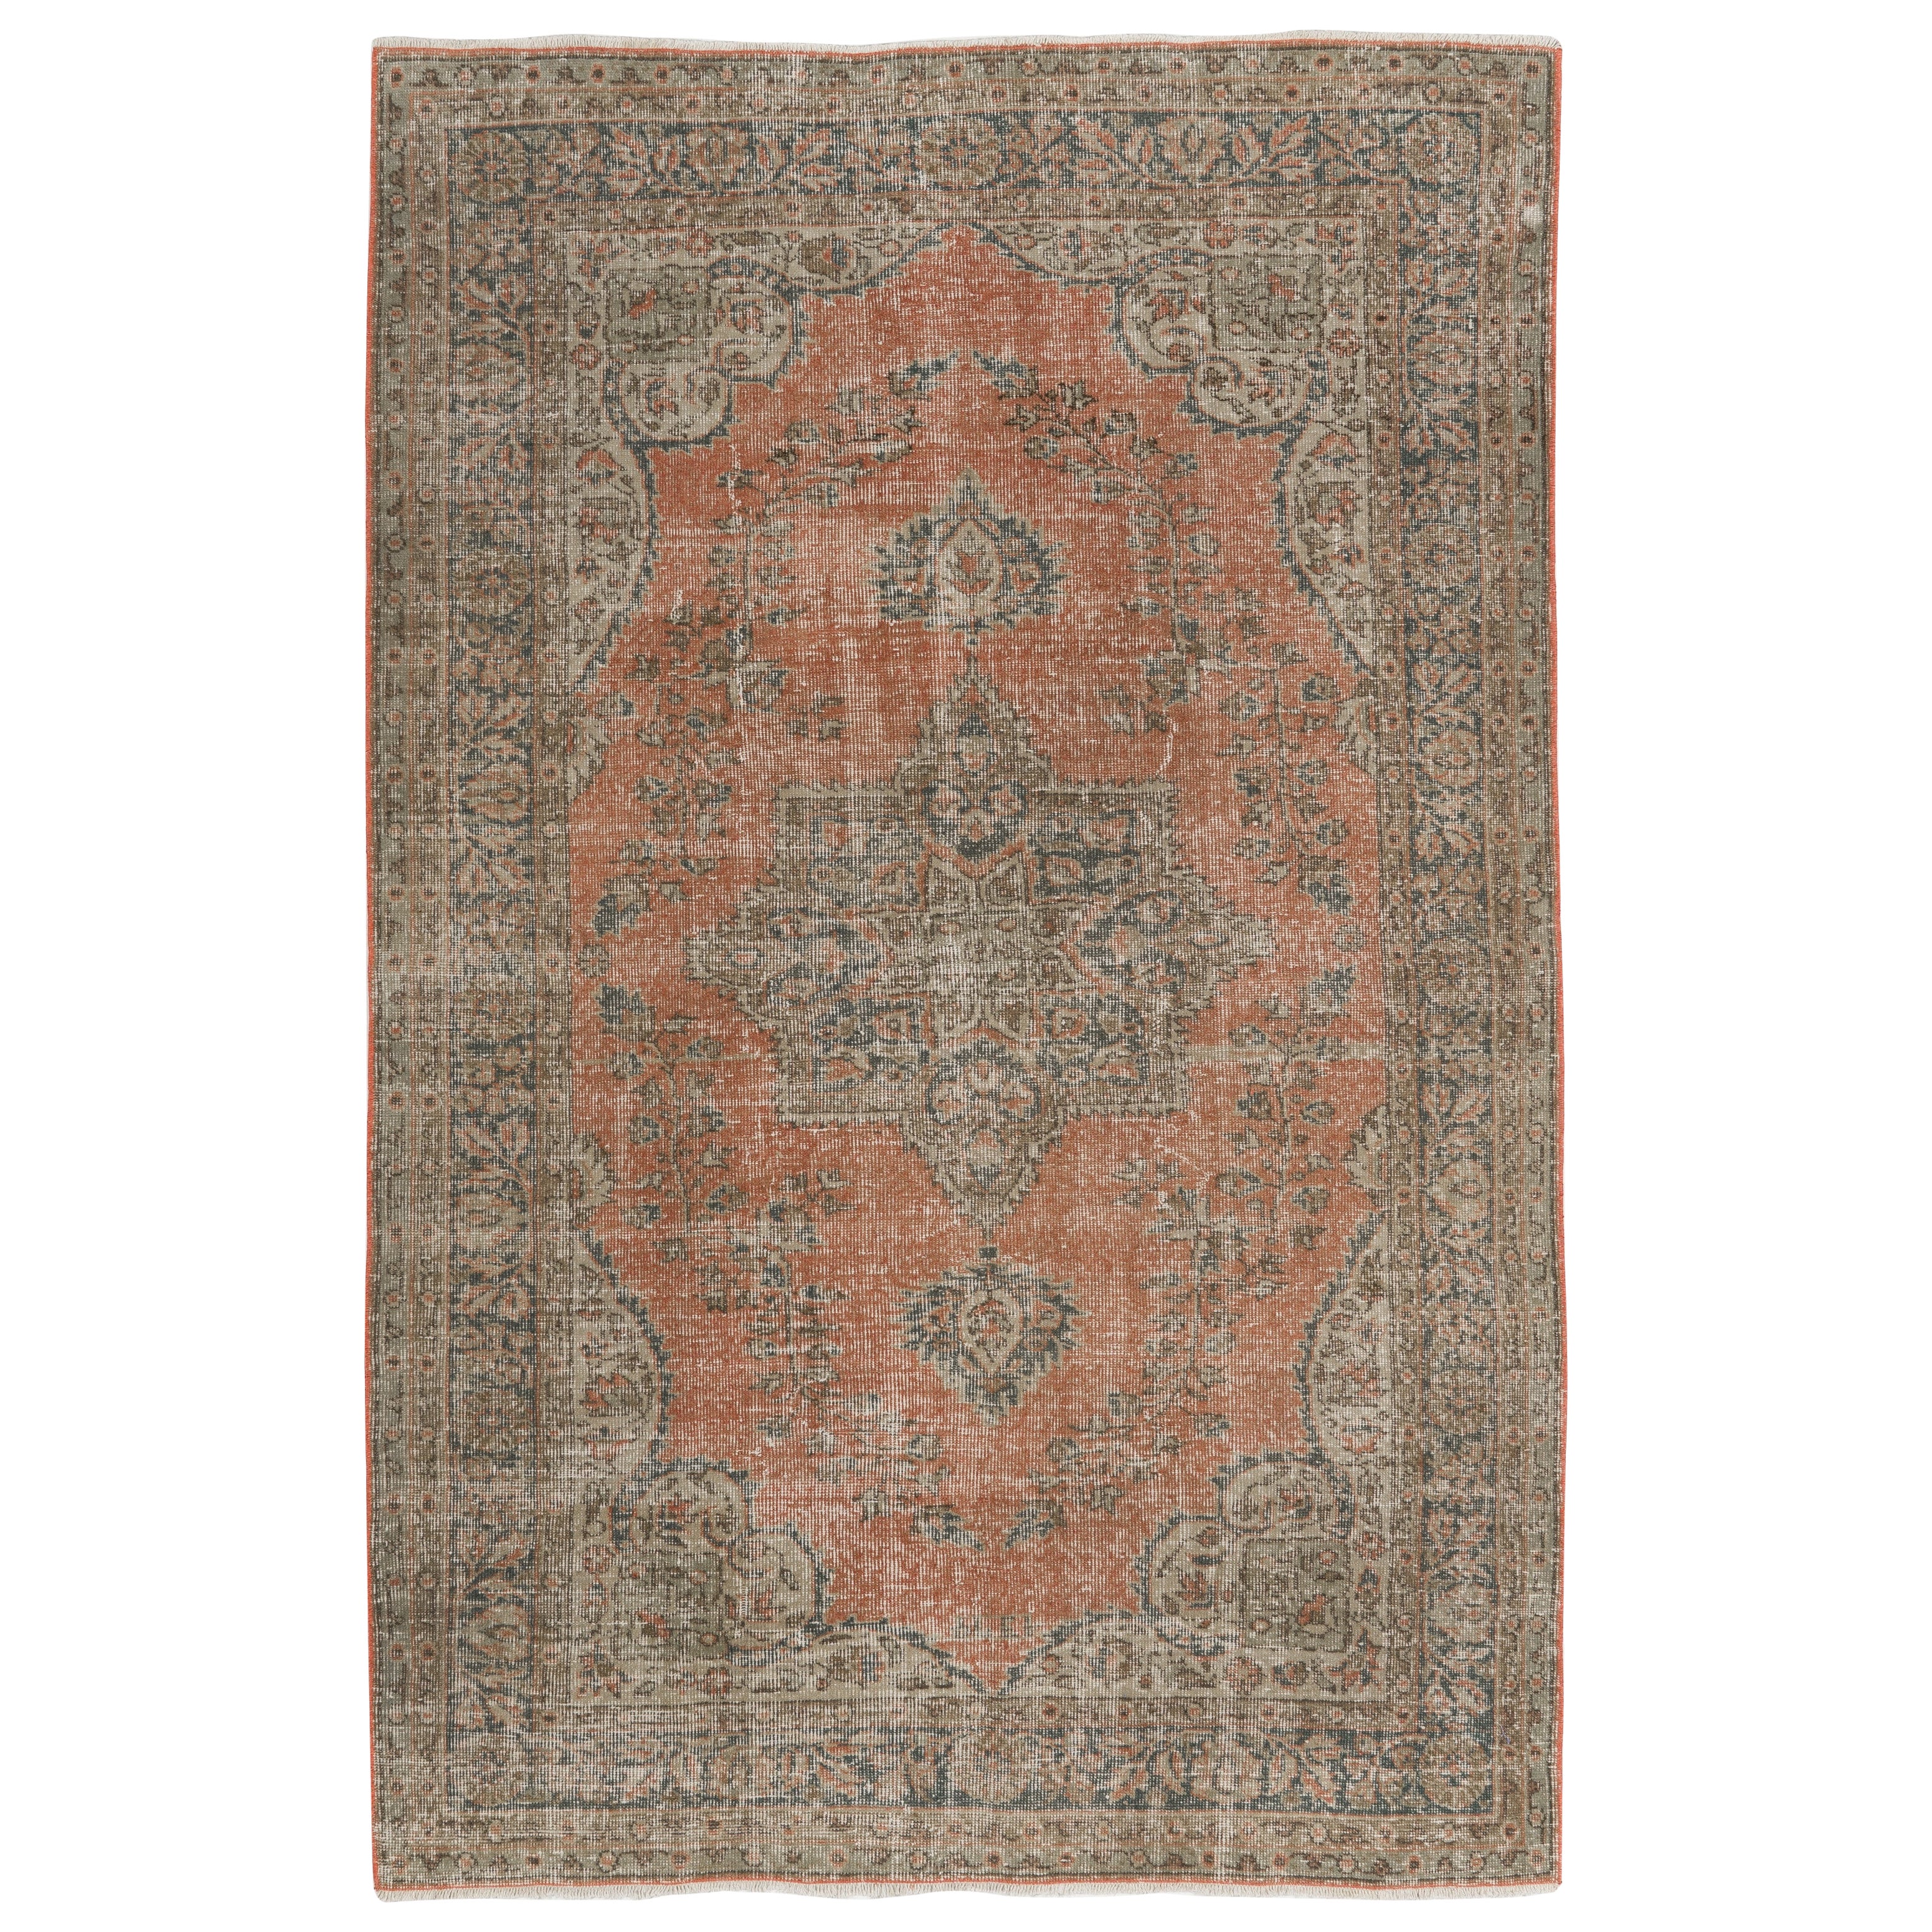 5.6x8.7 Ft One-of-a-Kind Fine Vintage Handmade Turkish Rug in Terracotta color For Sale